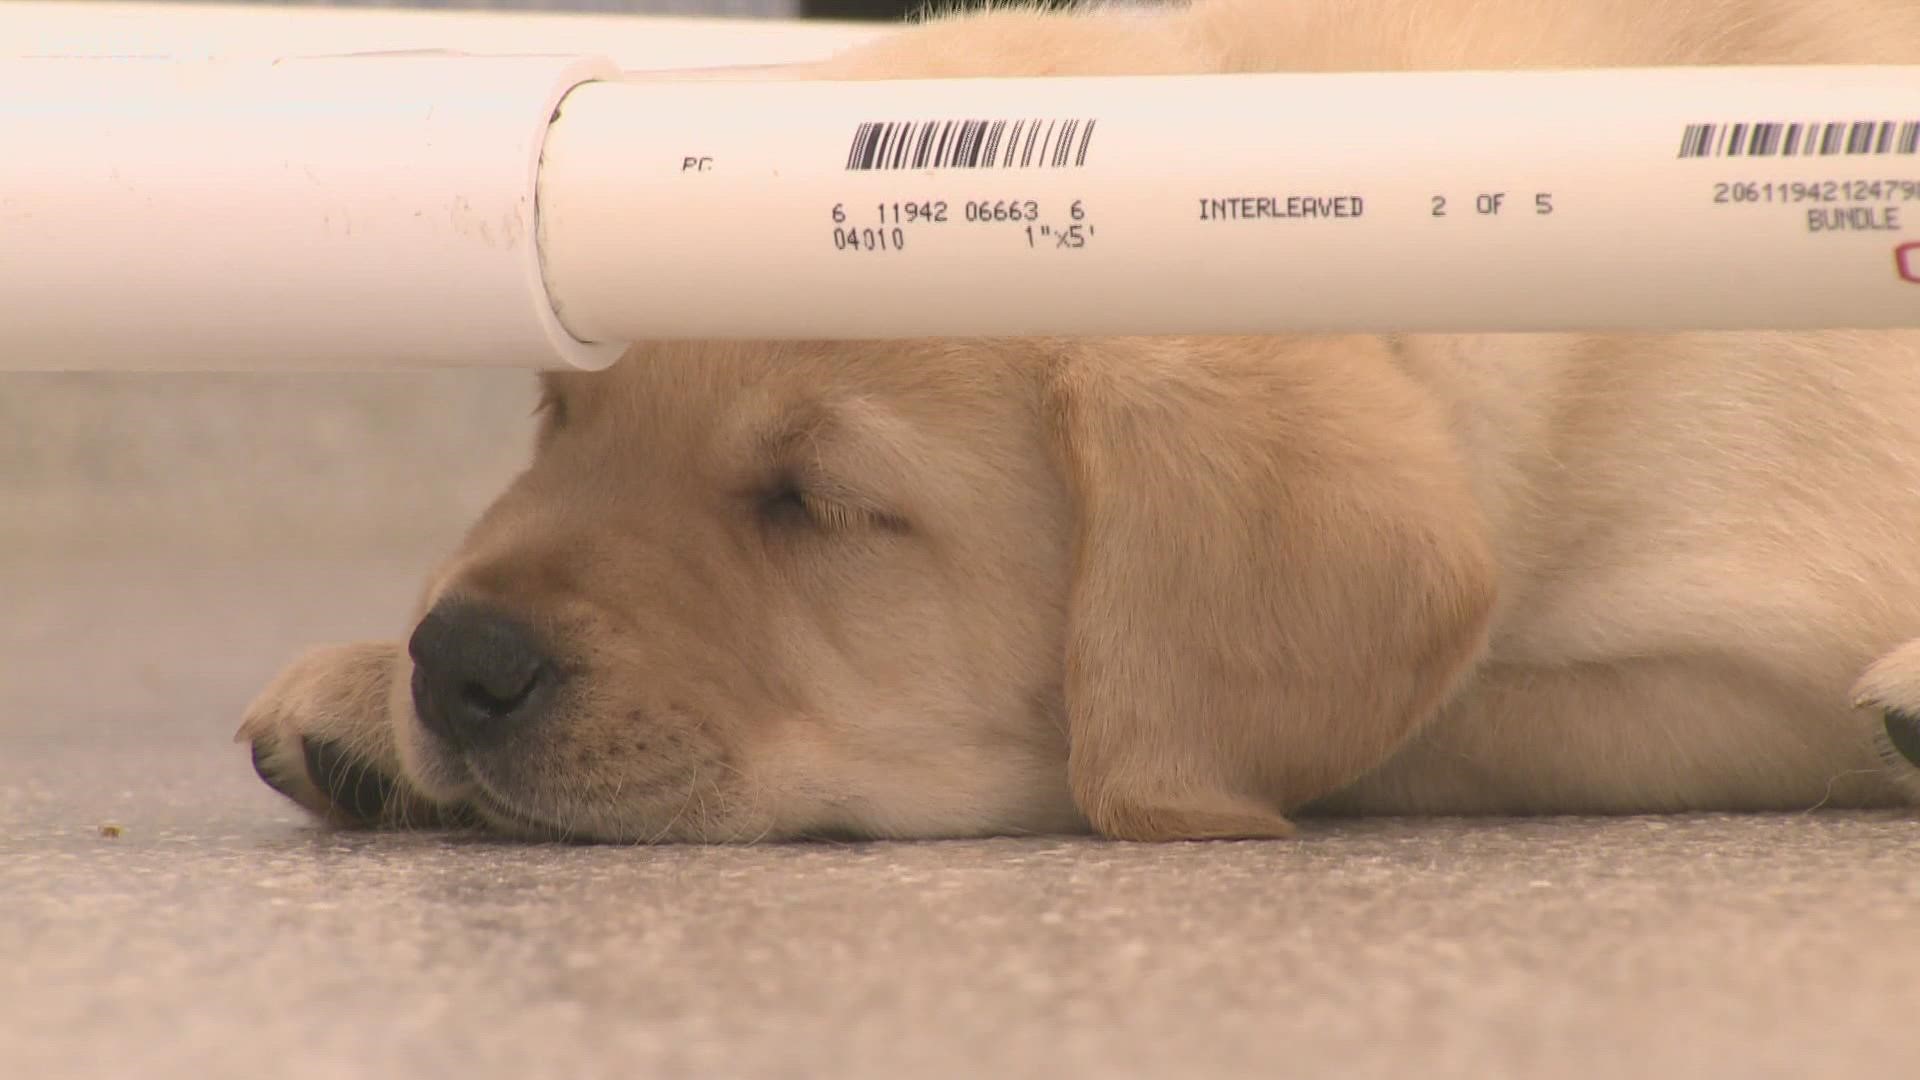 These puppies have a journey ahead of them as they become service dogs for those who need them.